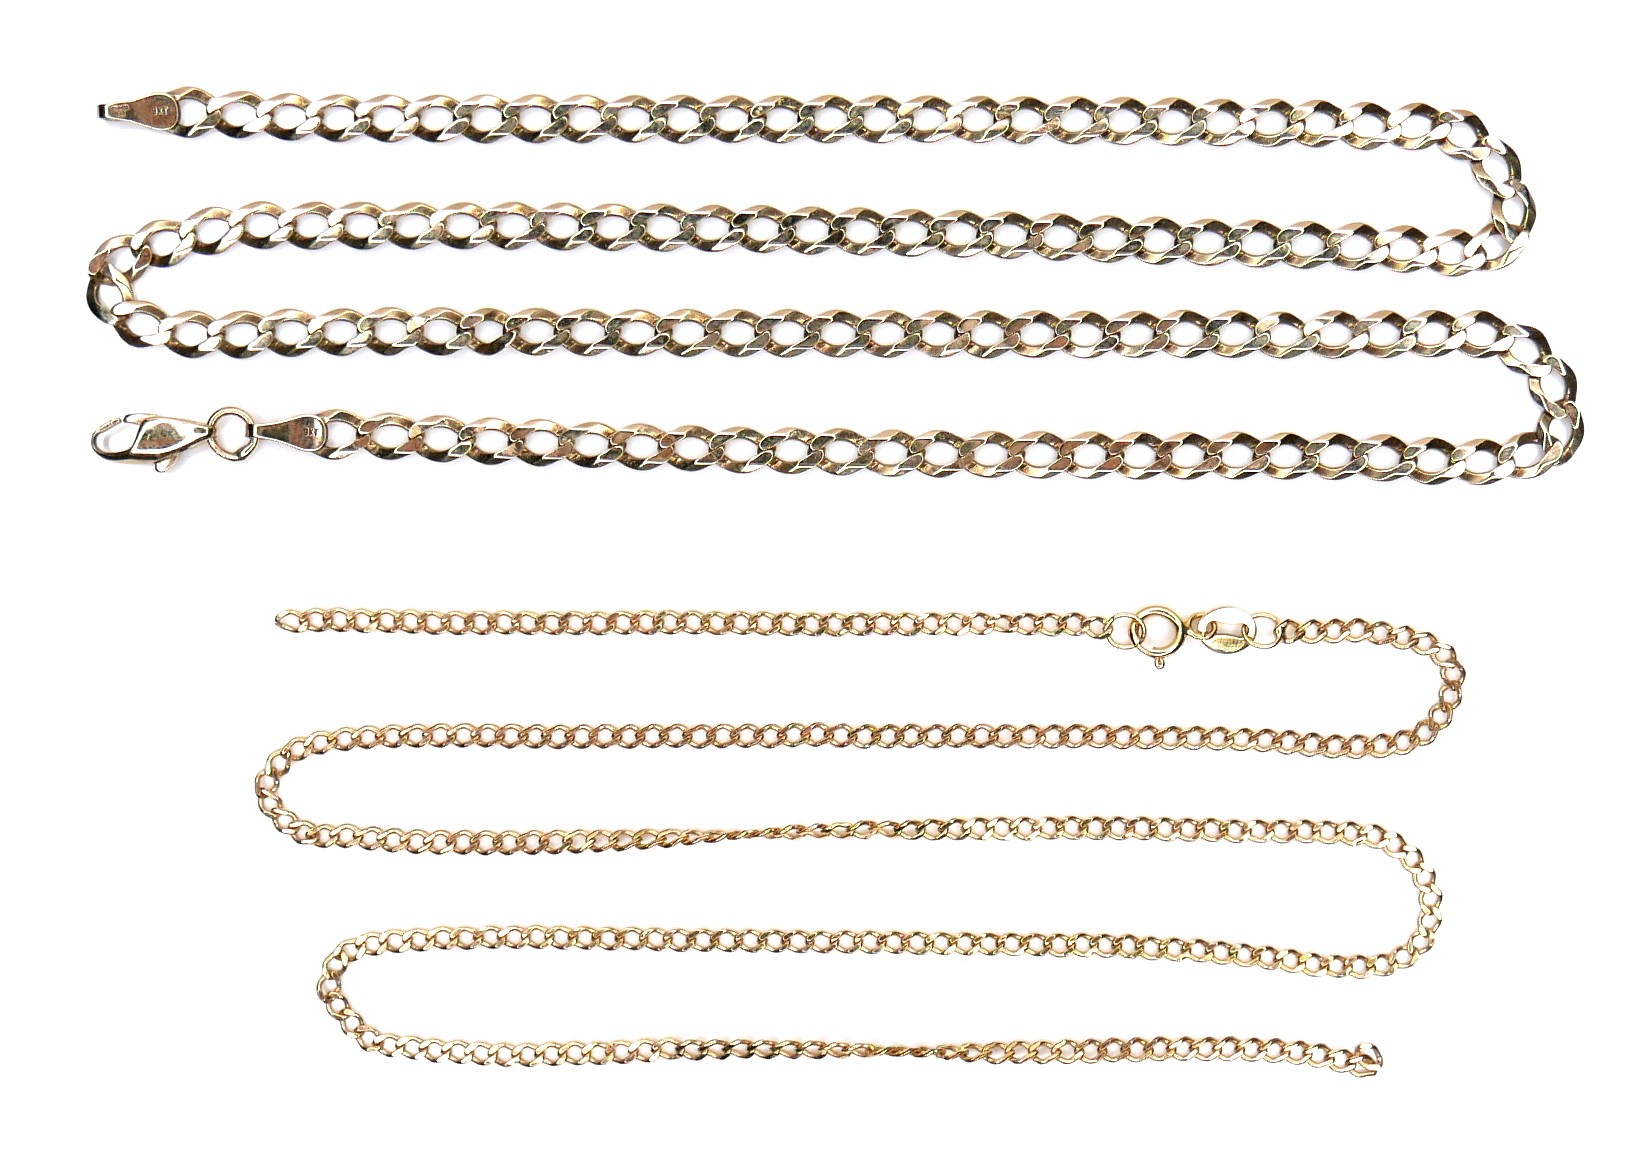 A 9k gold kerb link necklace, 7.6g, 0.4 by 50.5cm long, together with an Italian 9k gold kerb link